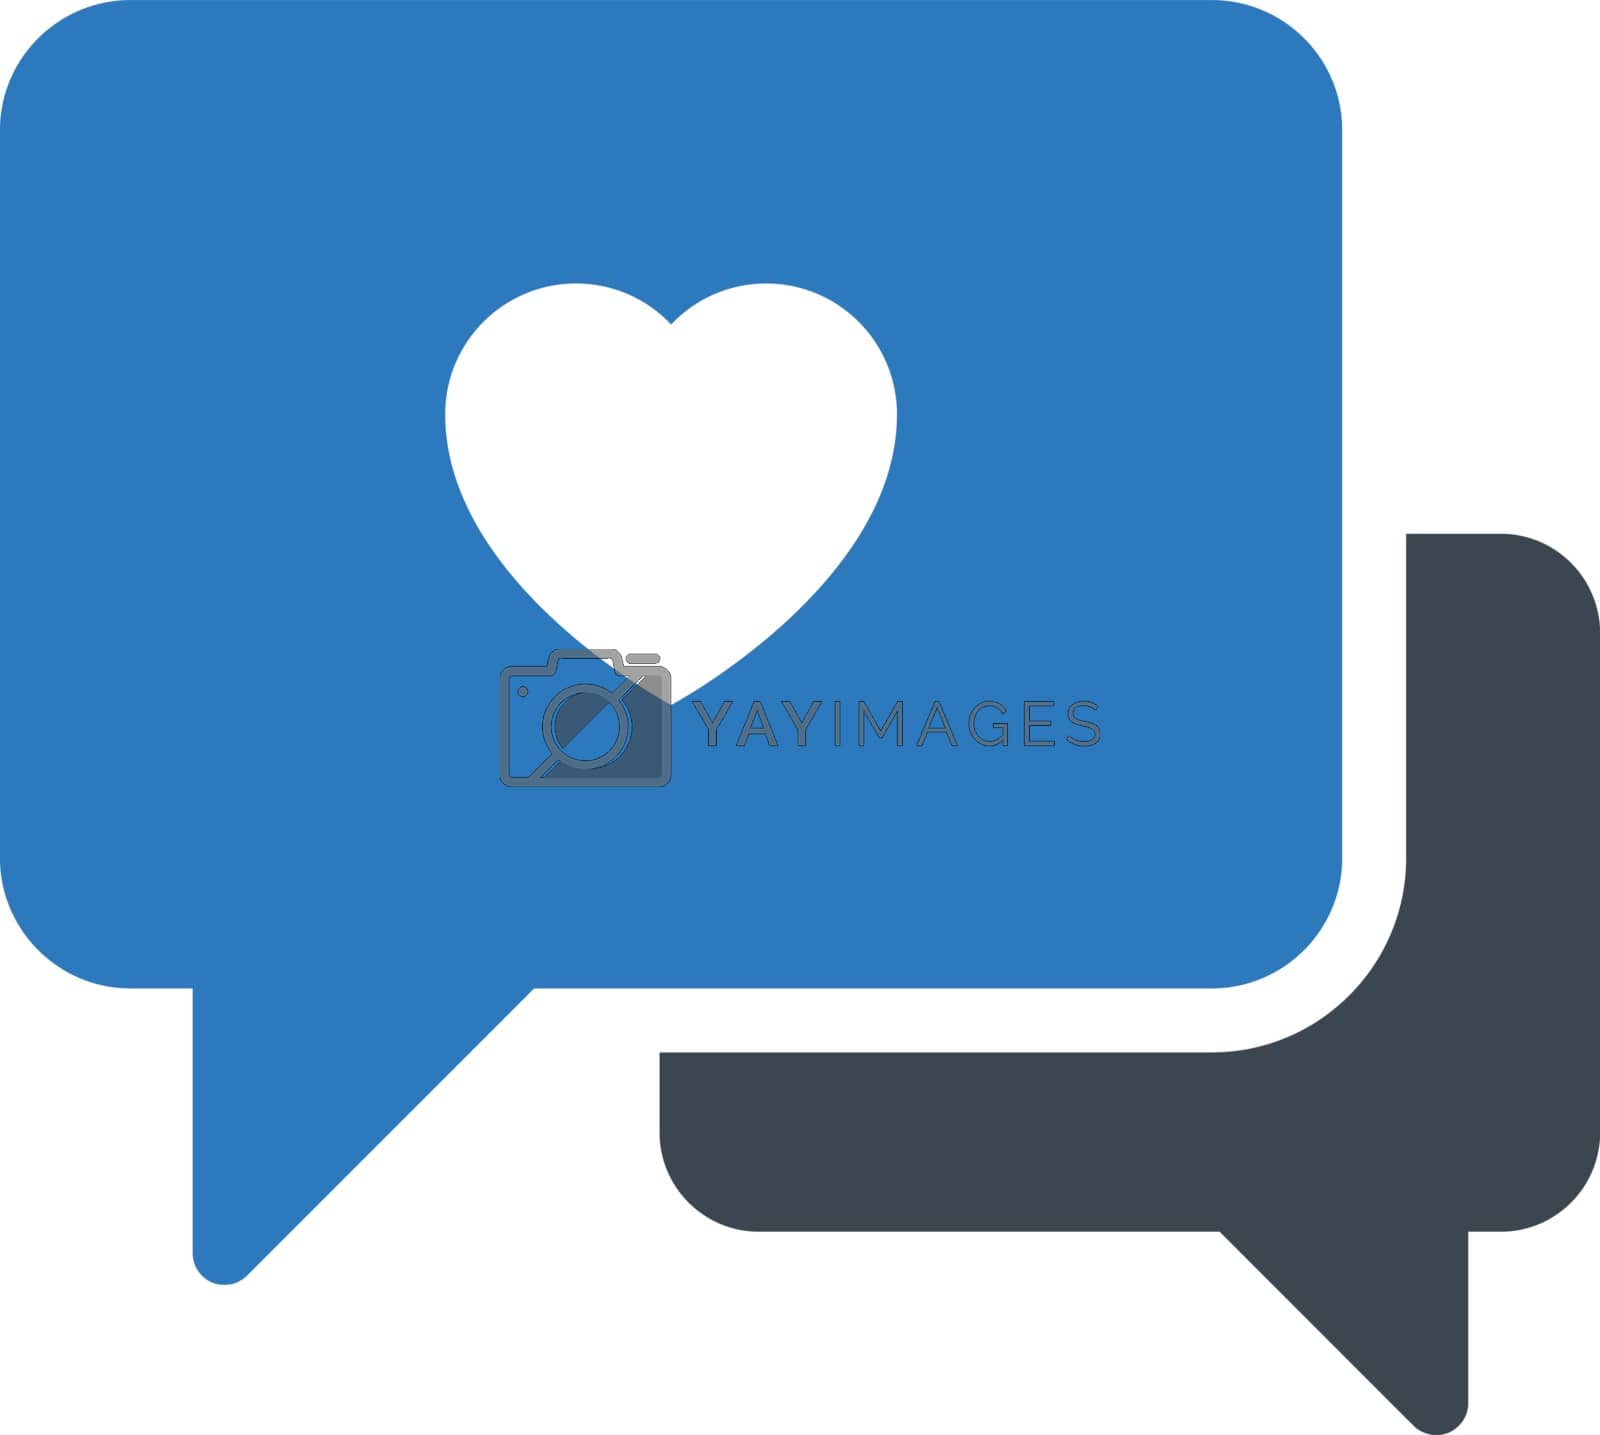 Royalty free image of chat by vectorstall